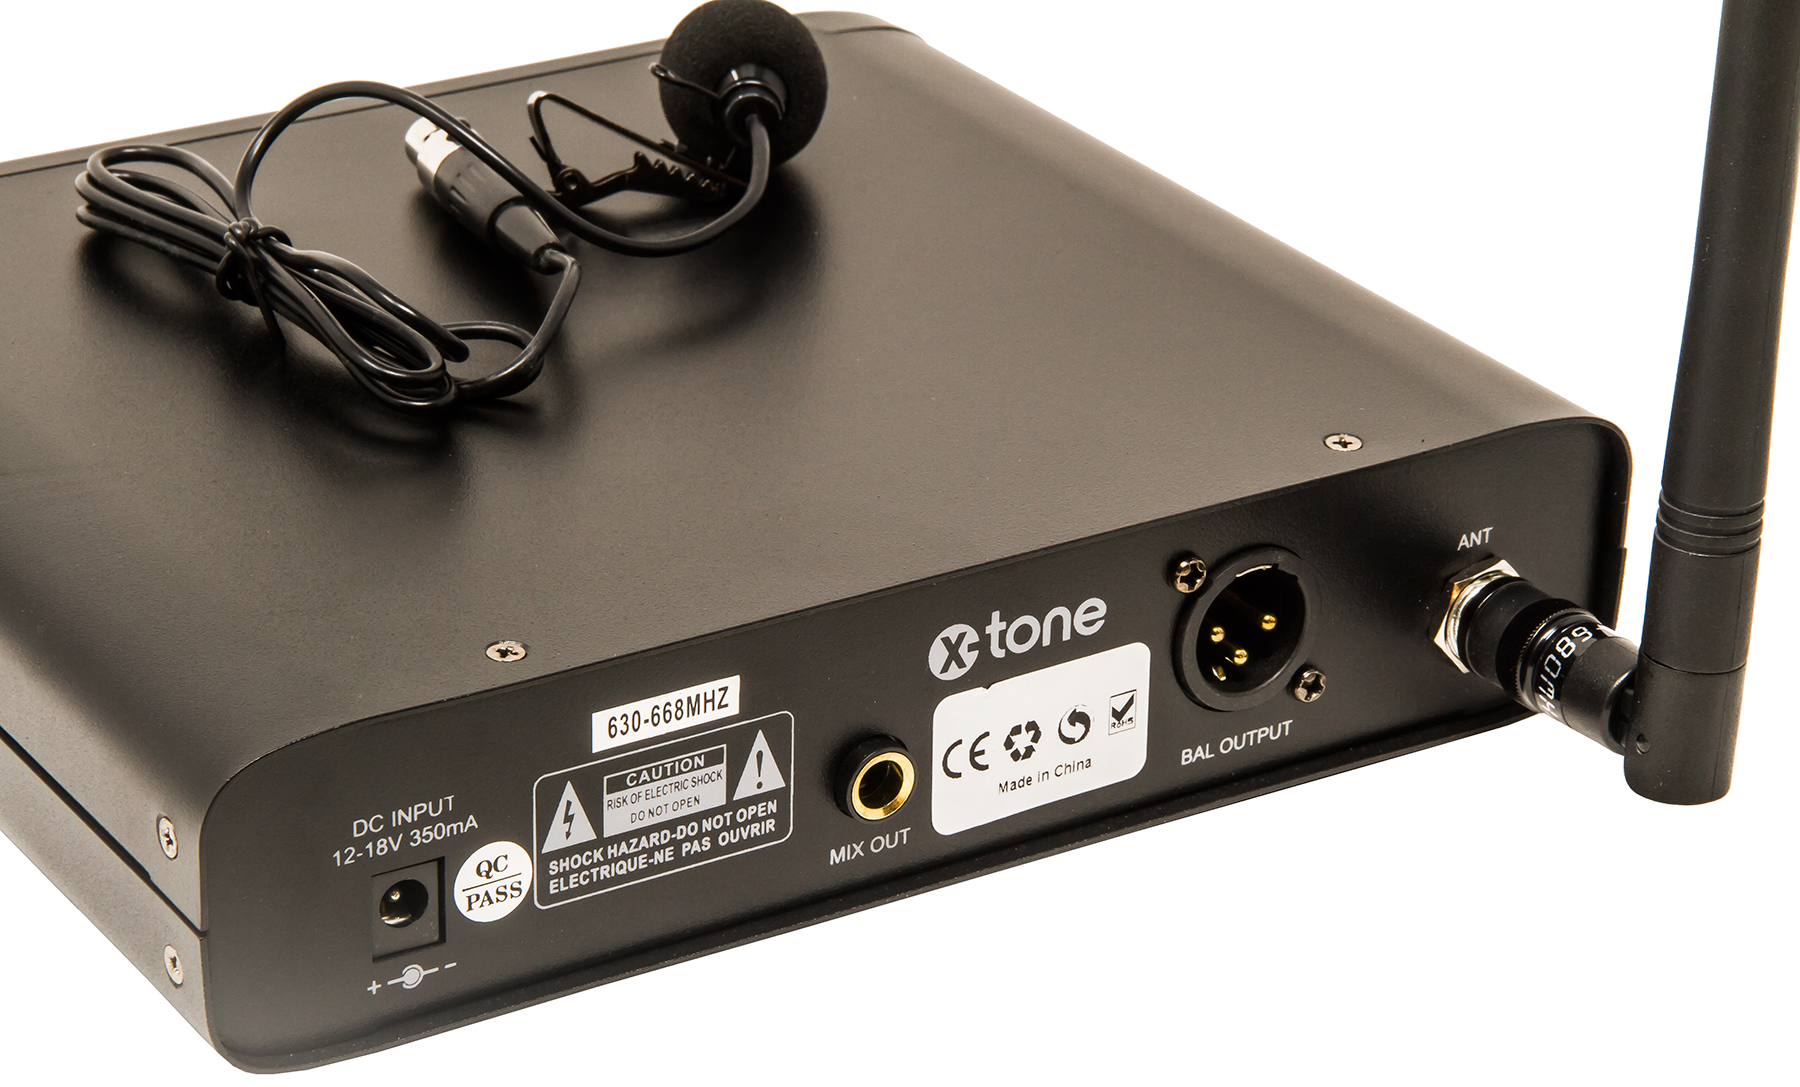 X-tone Xhf100l Systeme Hf Cravate Frequence Fixe - Wireless Lavalier microphone - Variation 3